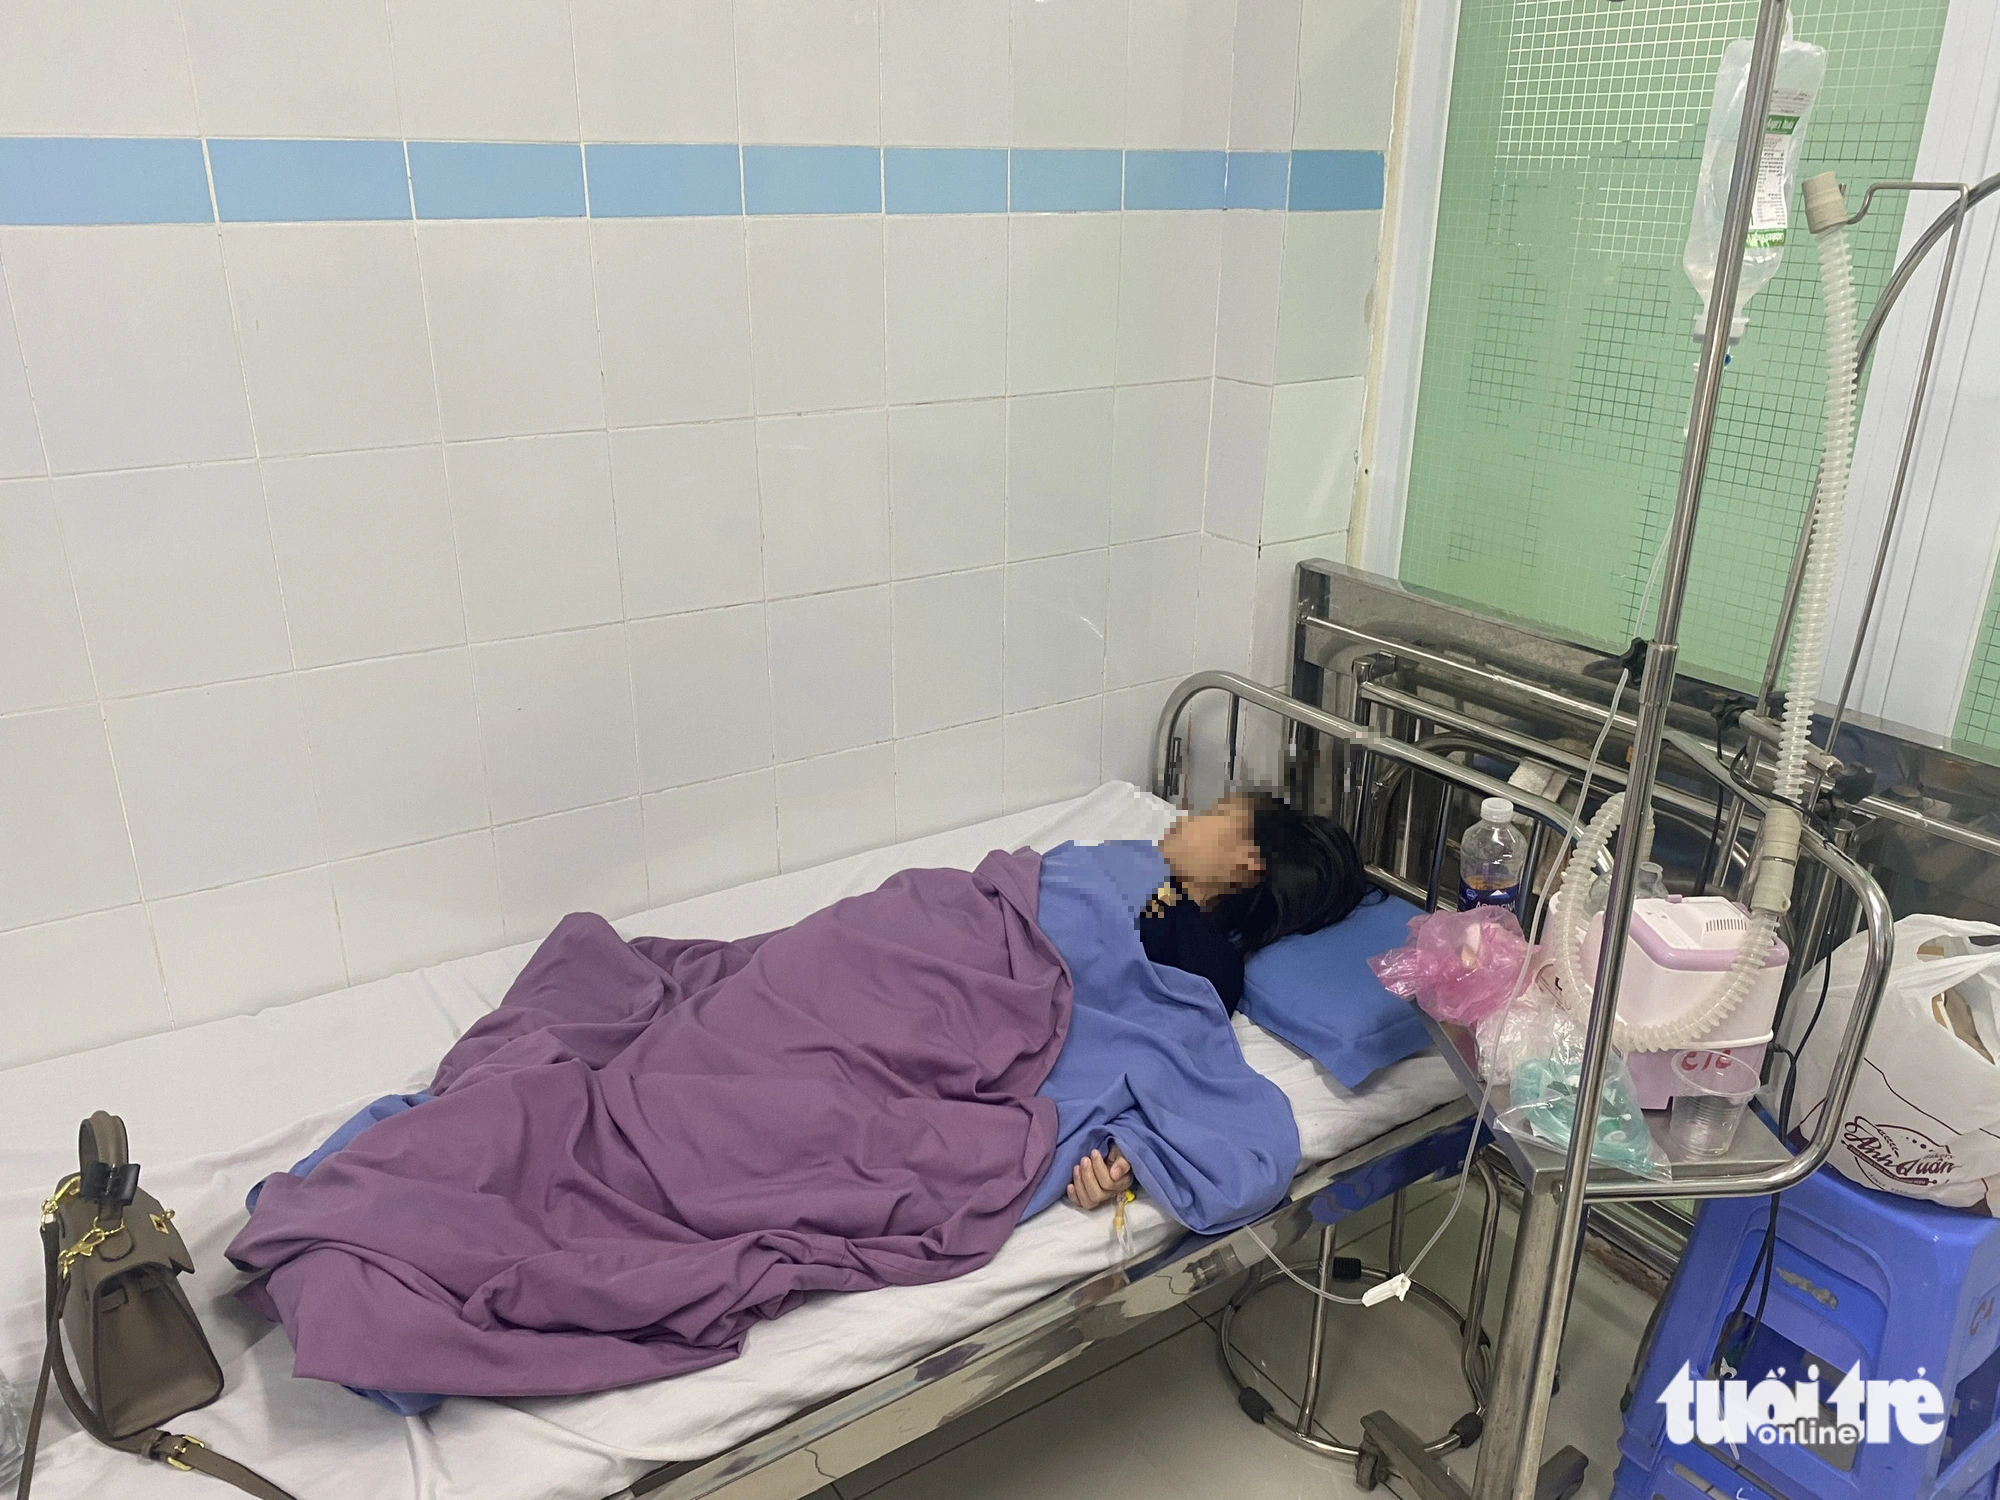 A food poisoning pediatric patient receives treatment at the emergency department of Hospital 199 in Da Nang City, central Vietnam, June 26, 2023. Photo: Truong Trung / Tuoi Tre